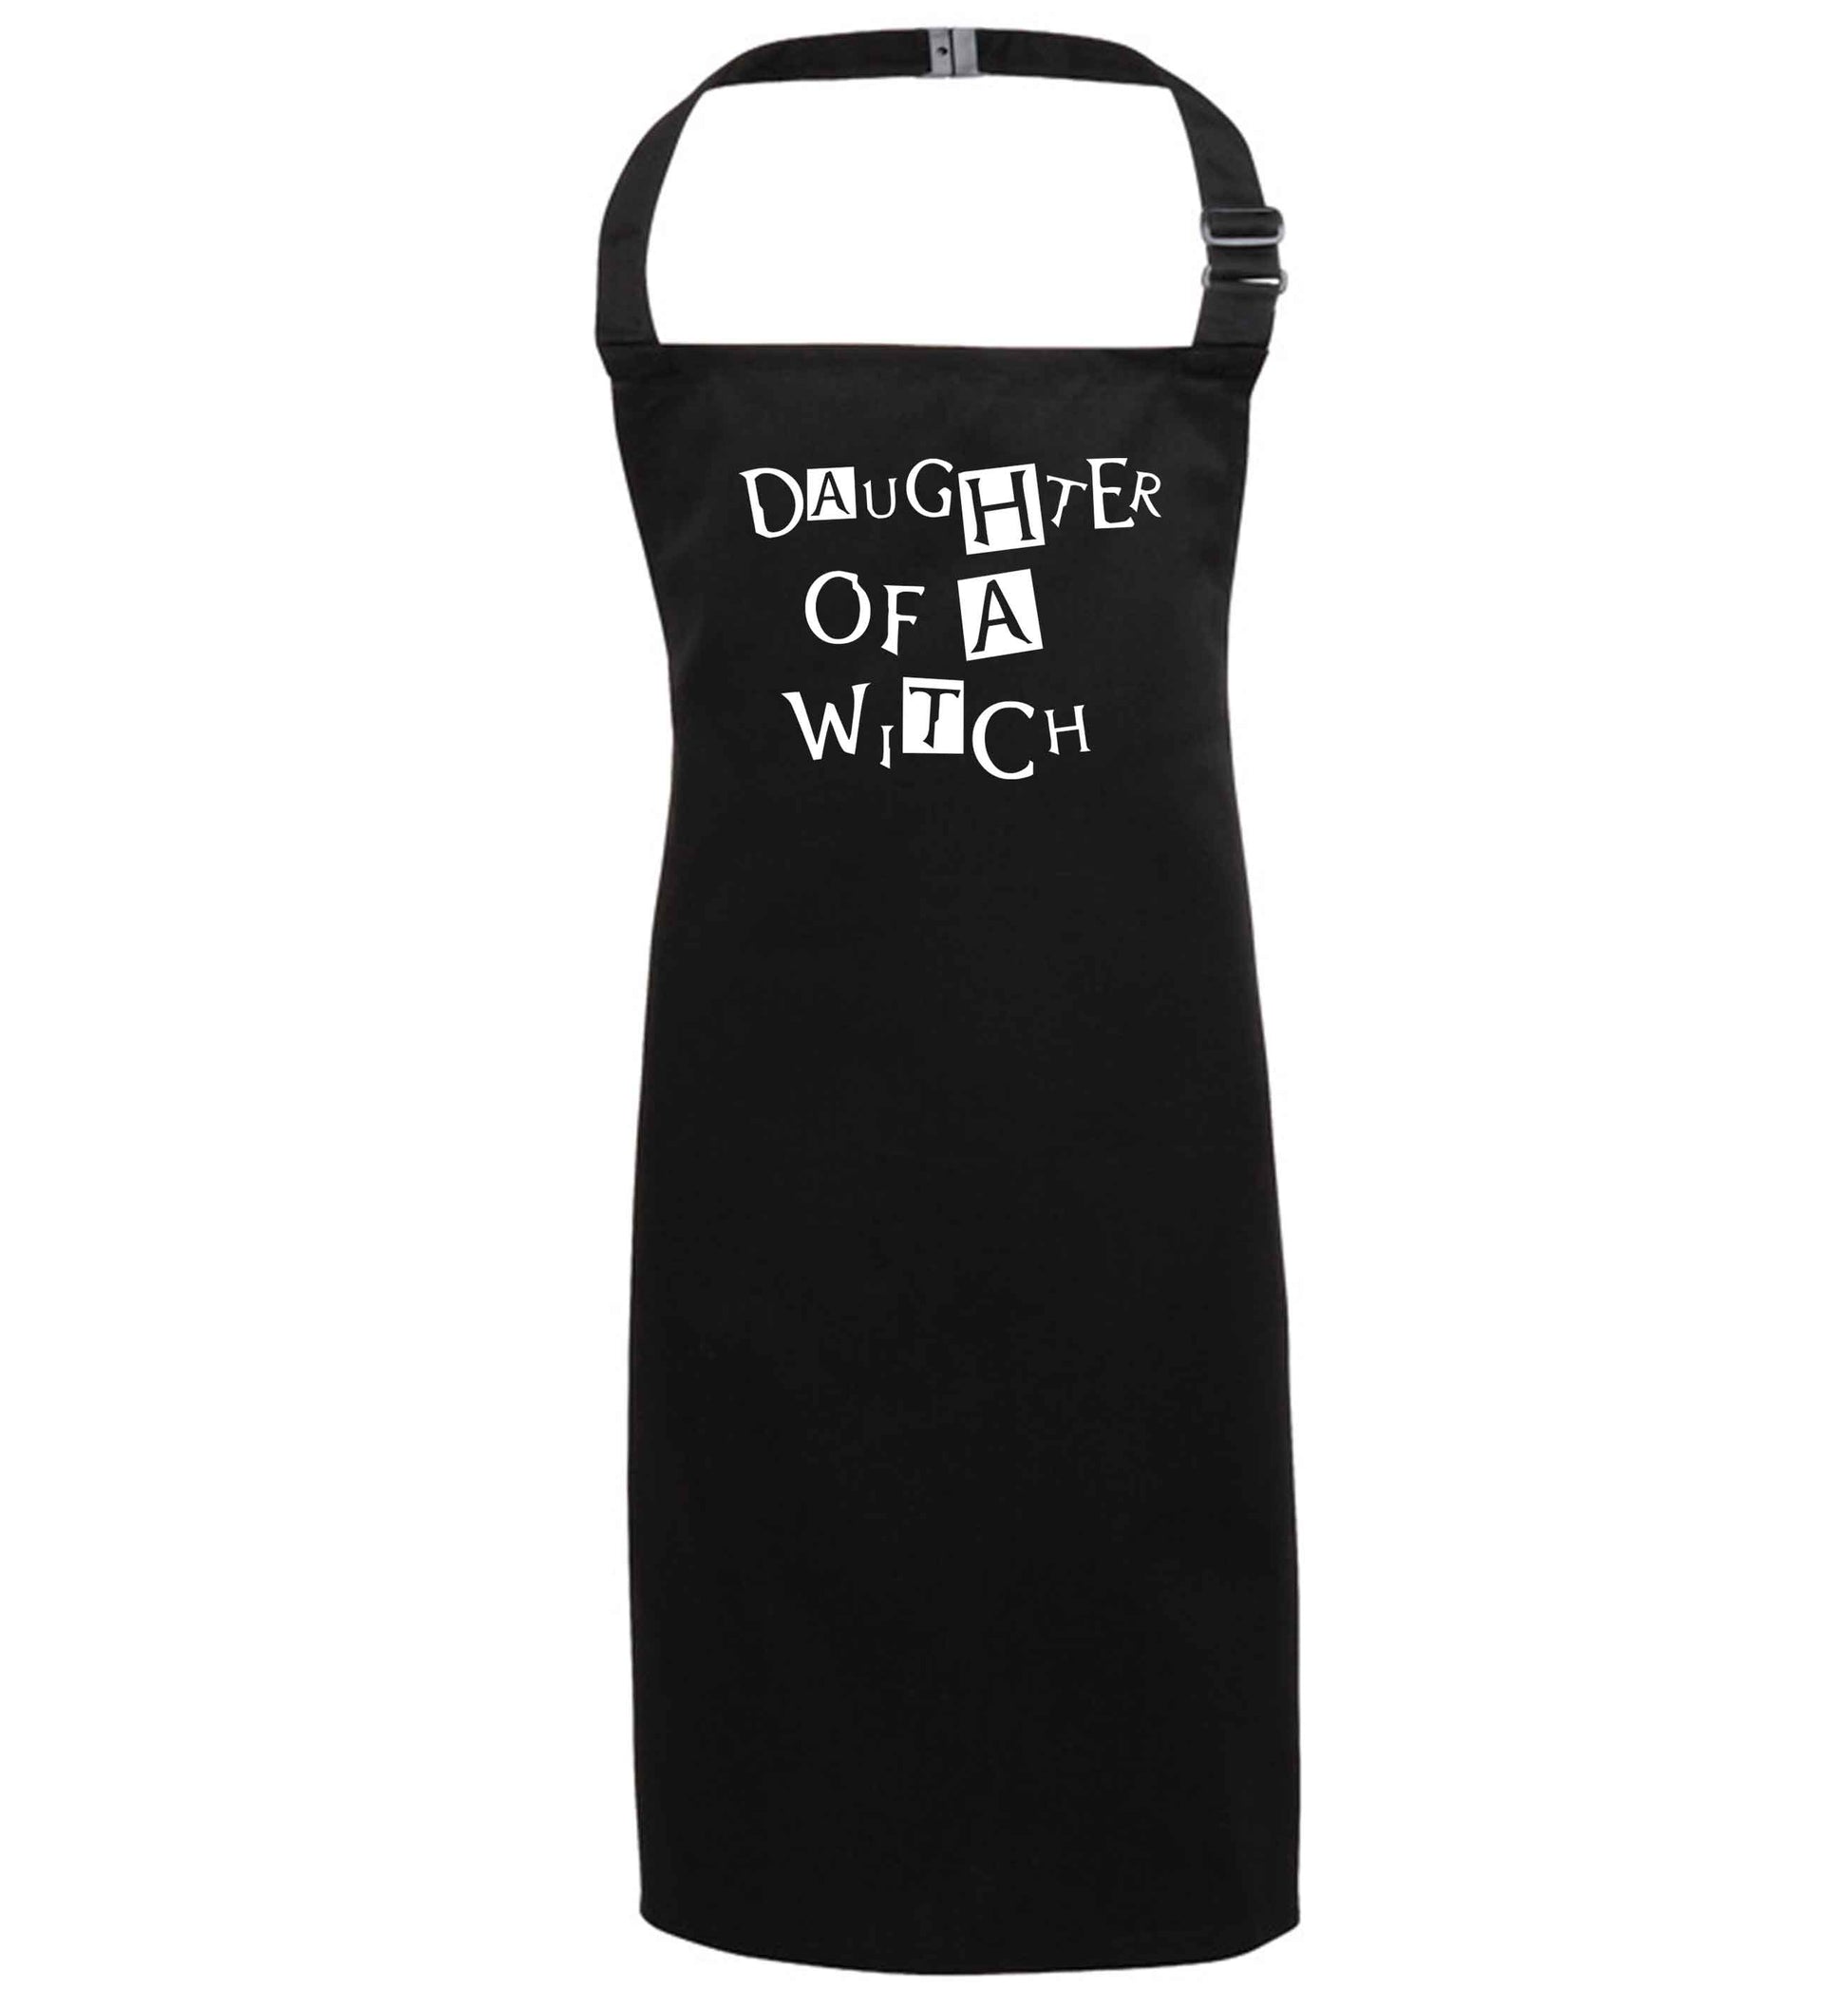 Daughter of a witch black apron 7-10 years